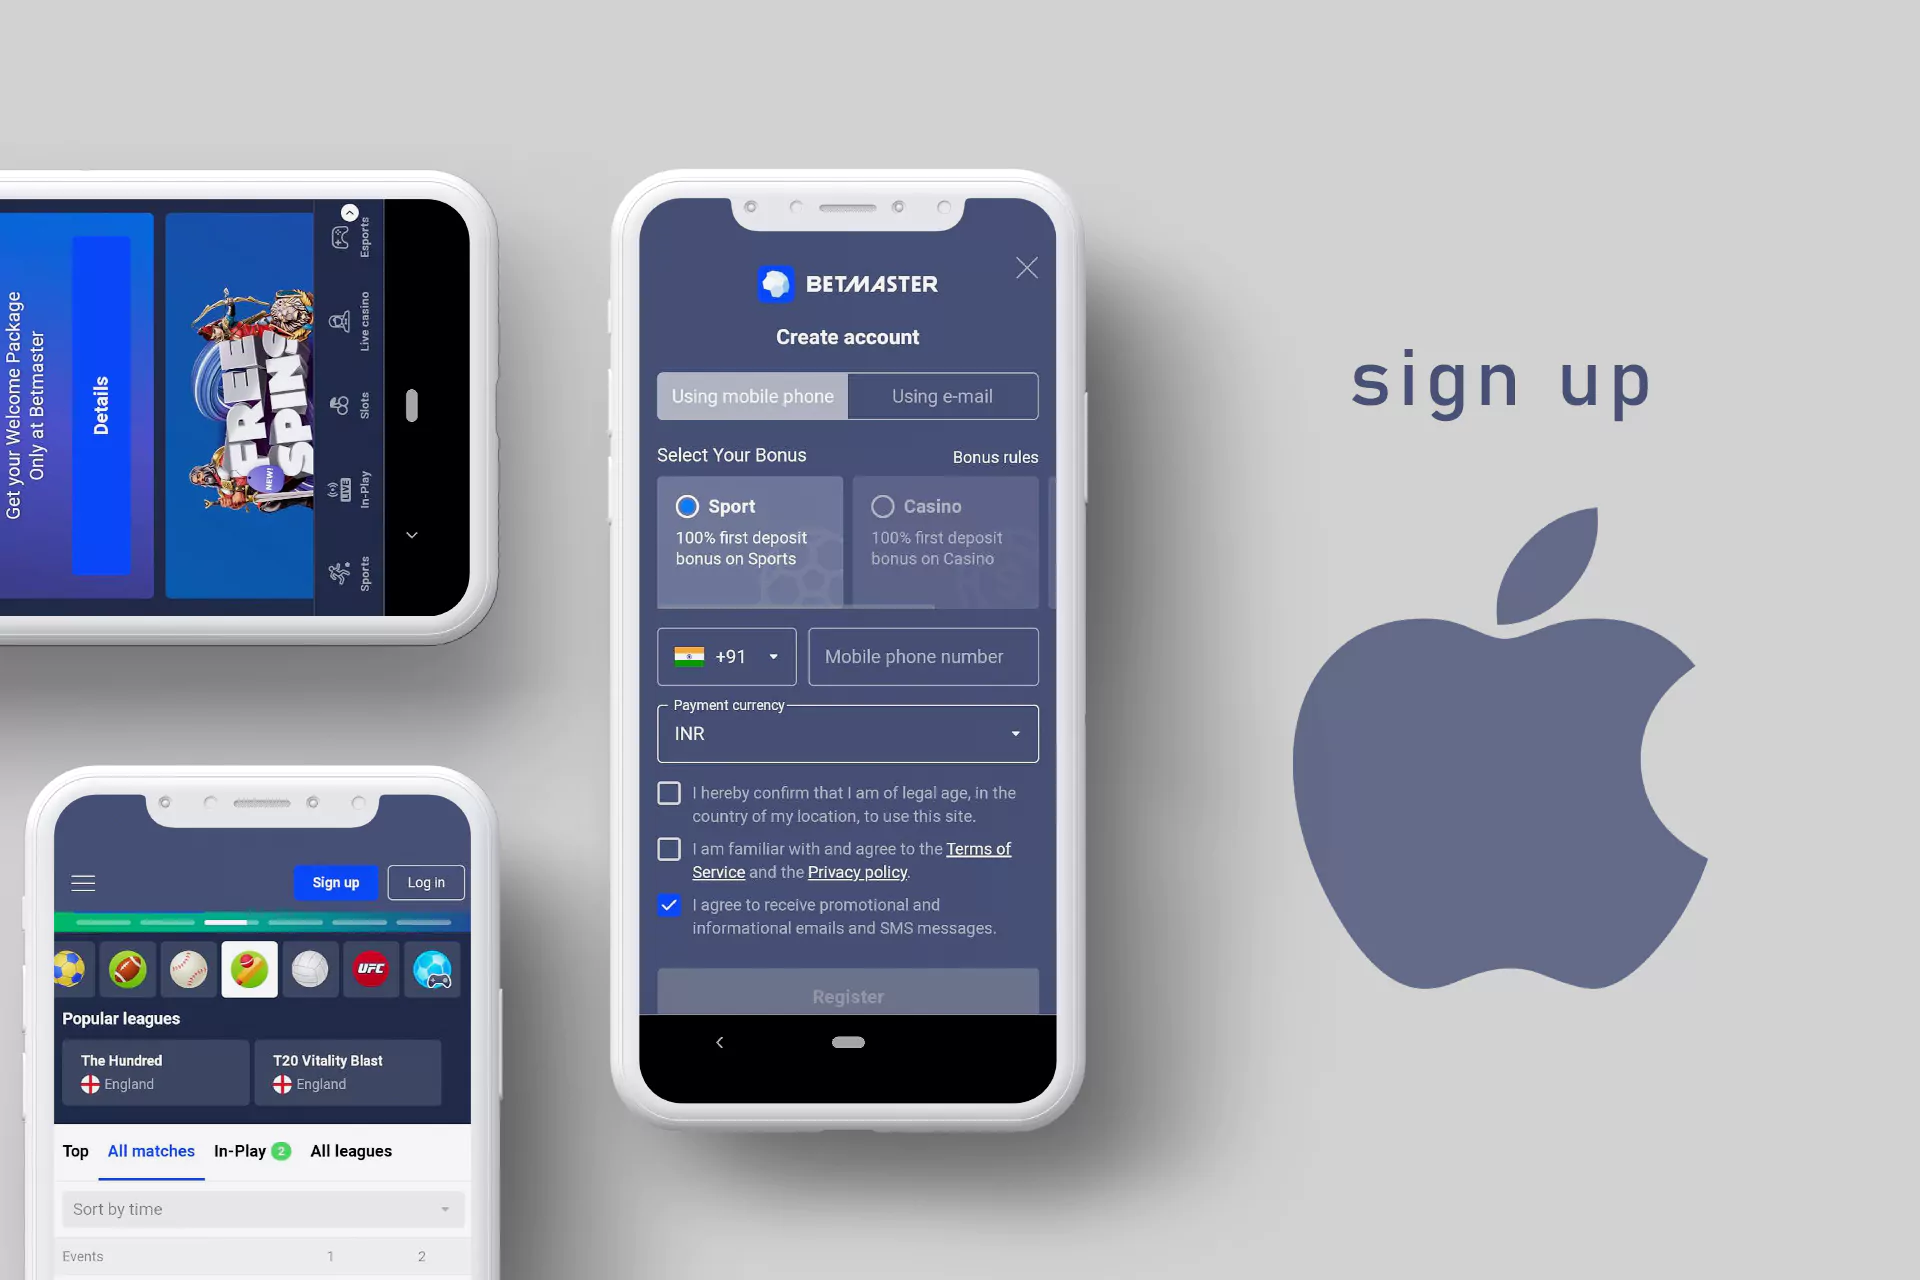 Create a new account in the app or sign in if you already have one.